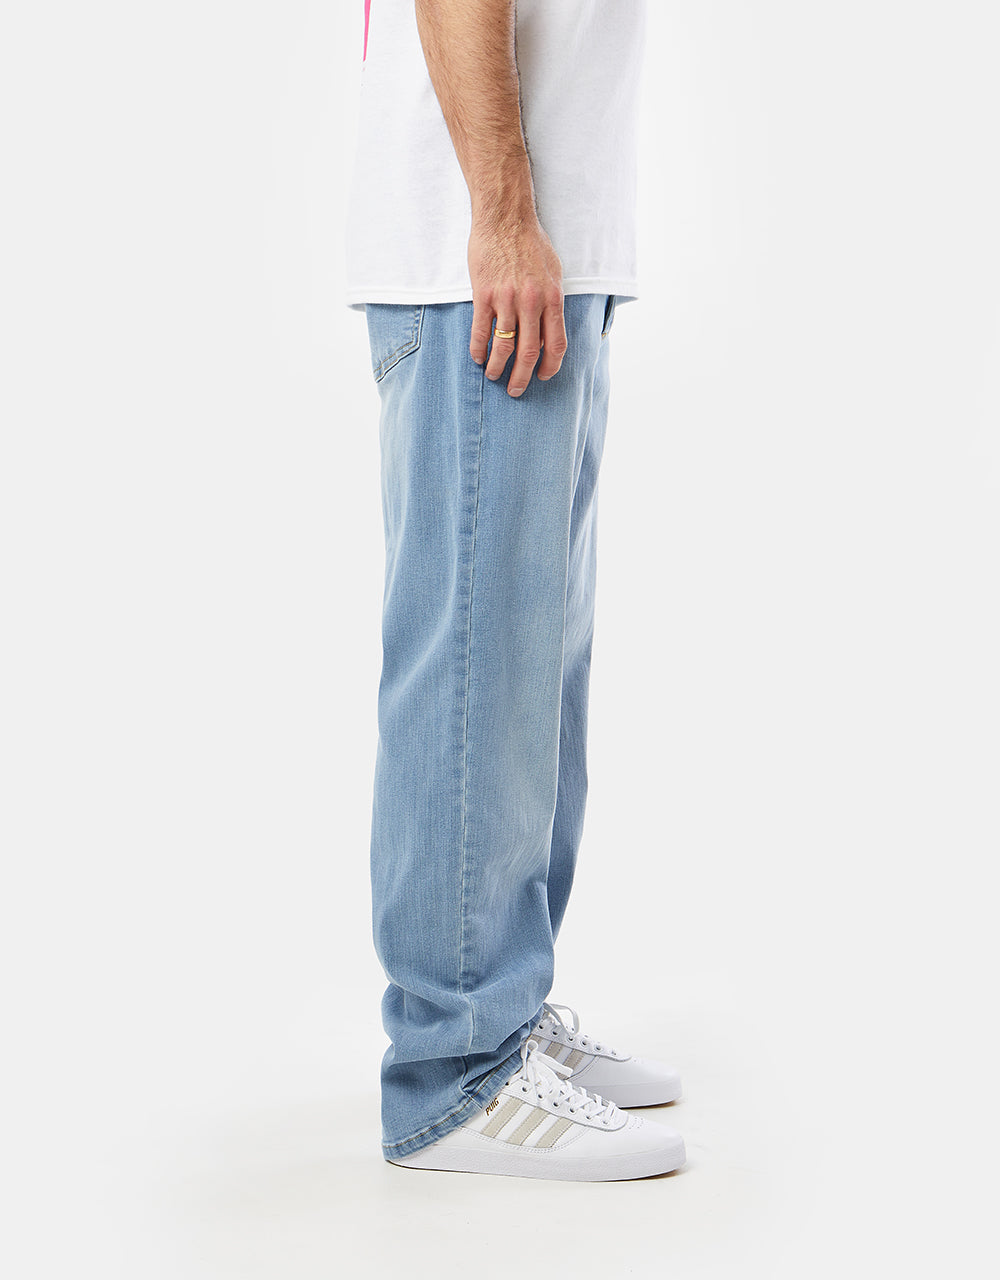 Route One Nineties Denim Jeans - Stone Wash